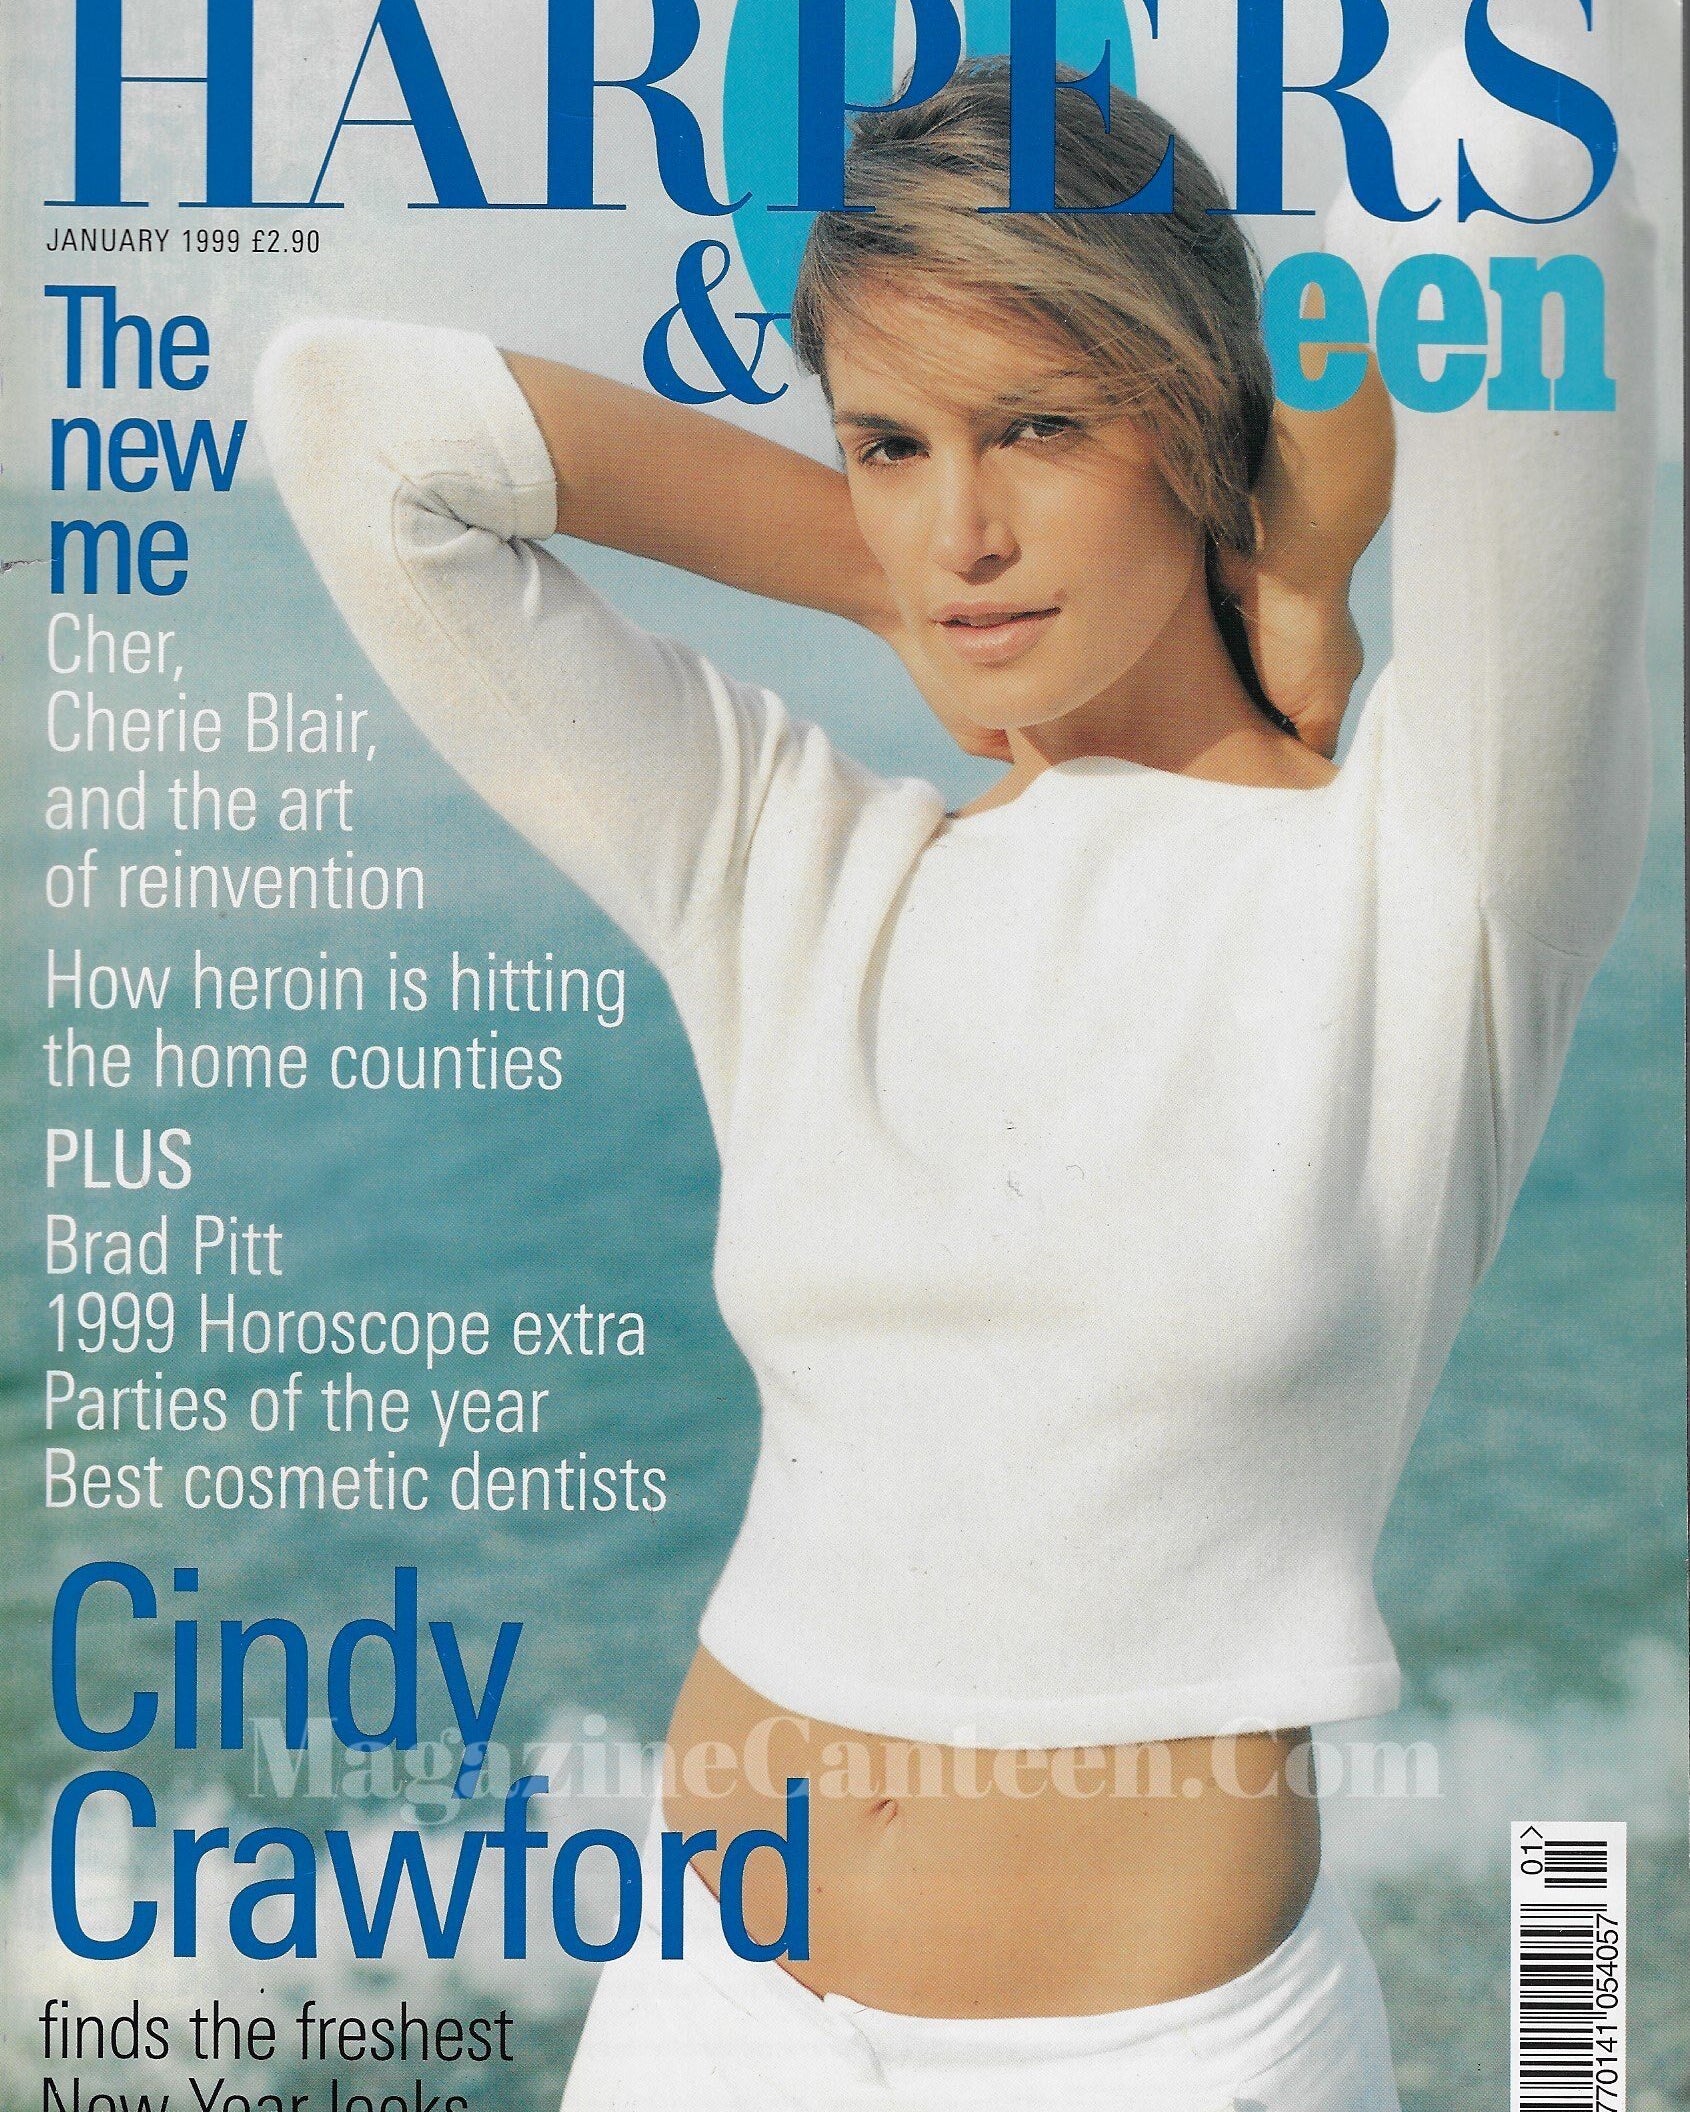 Harpers & Queen Magazine - Cindy Crawford